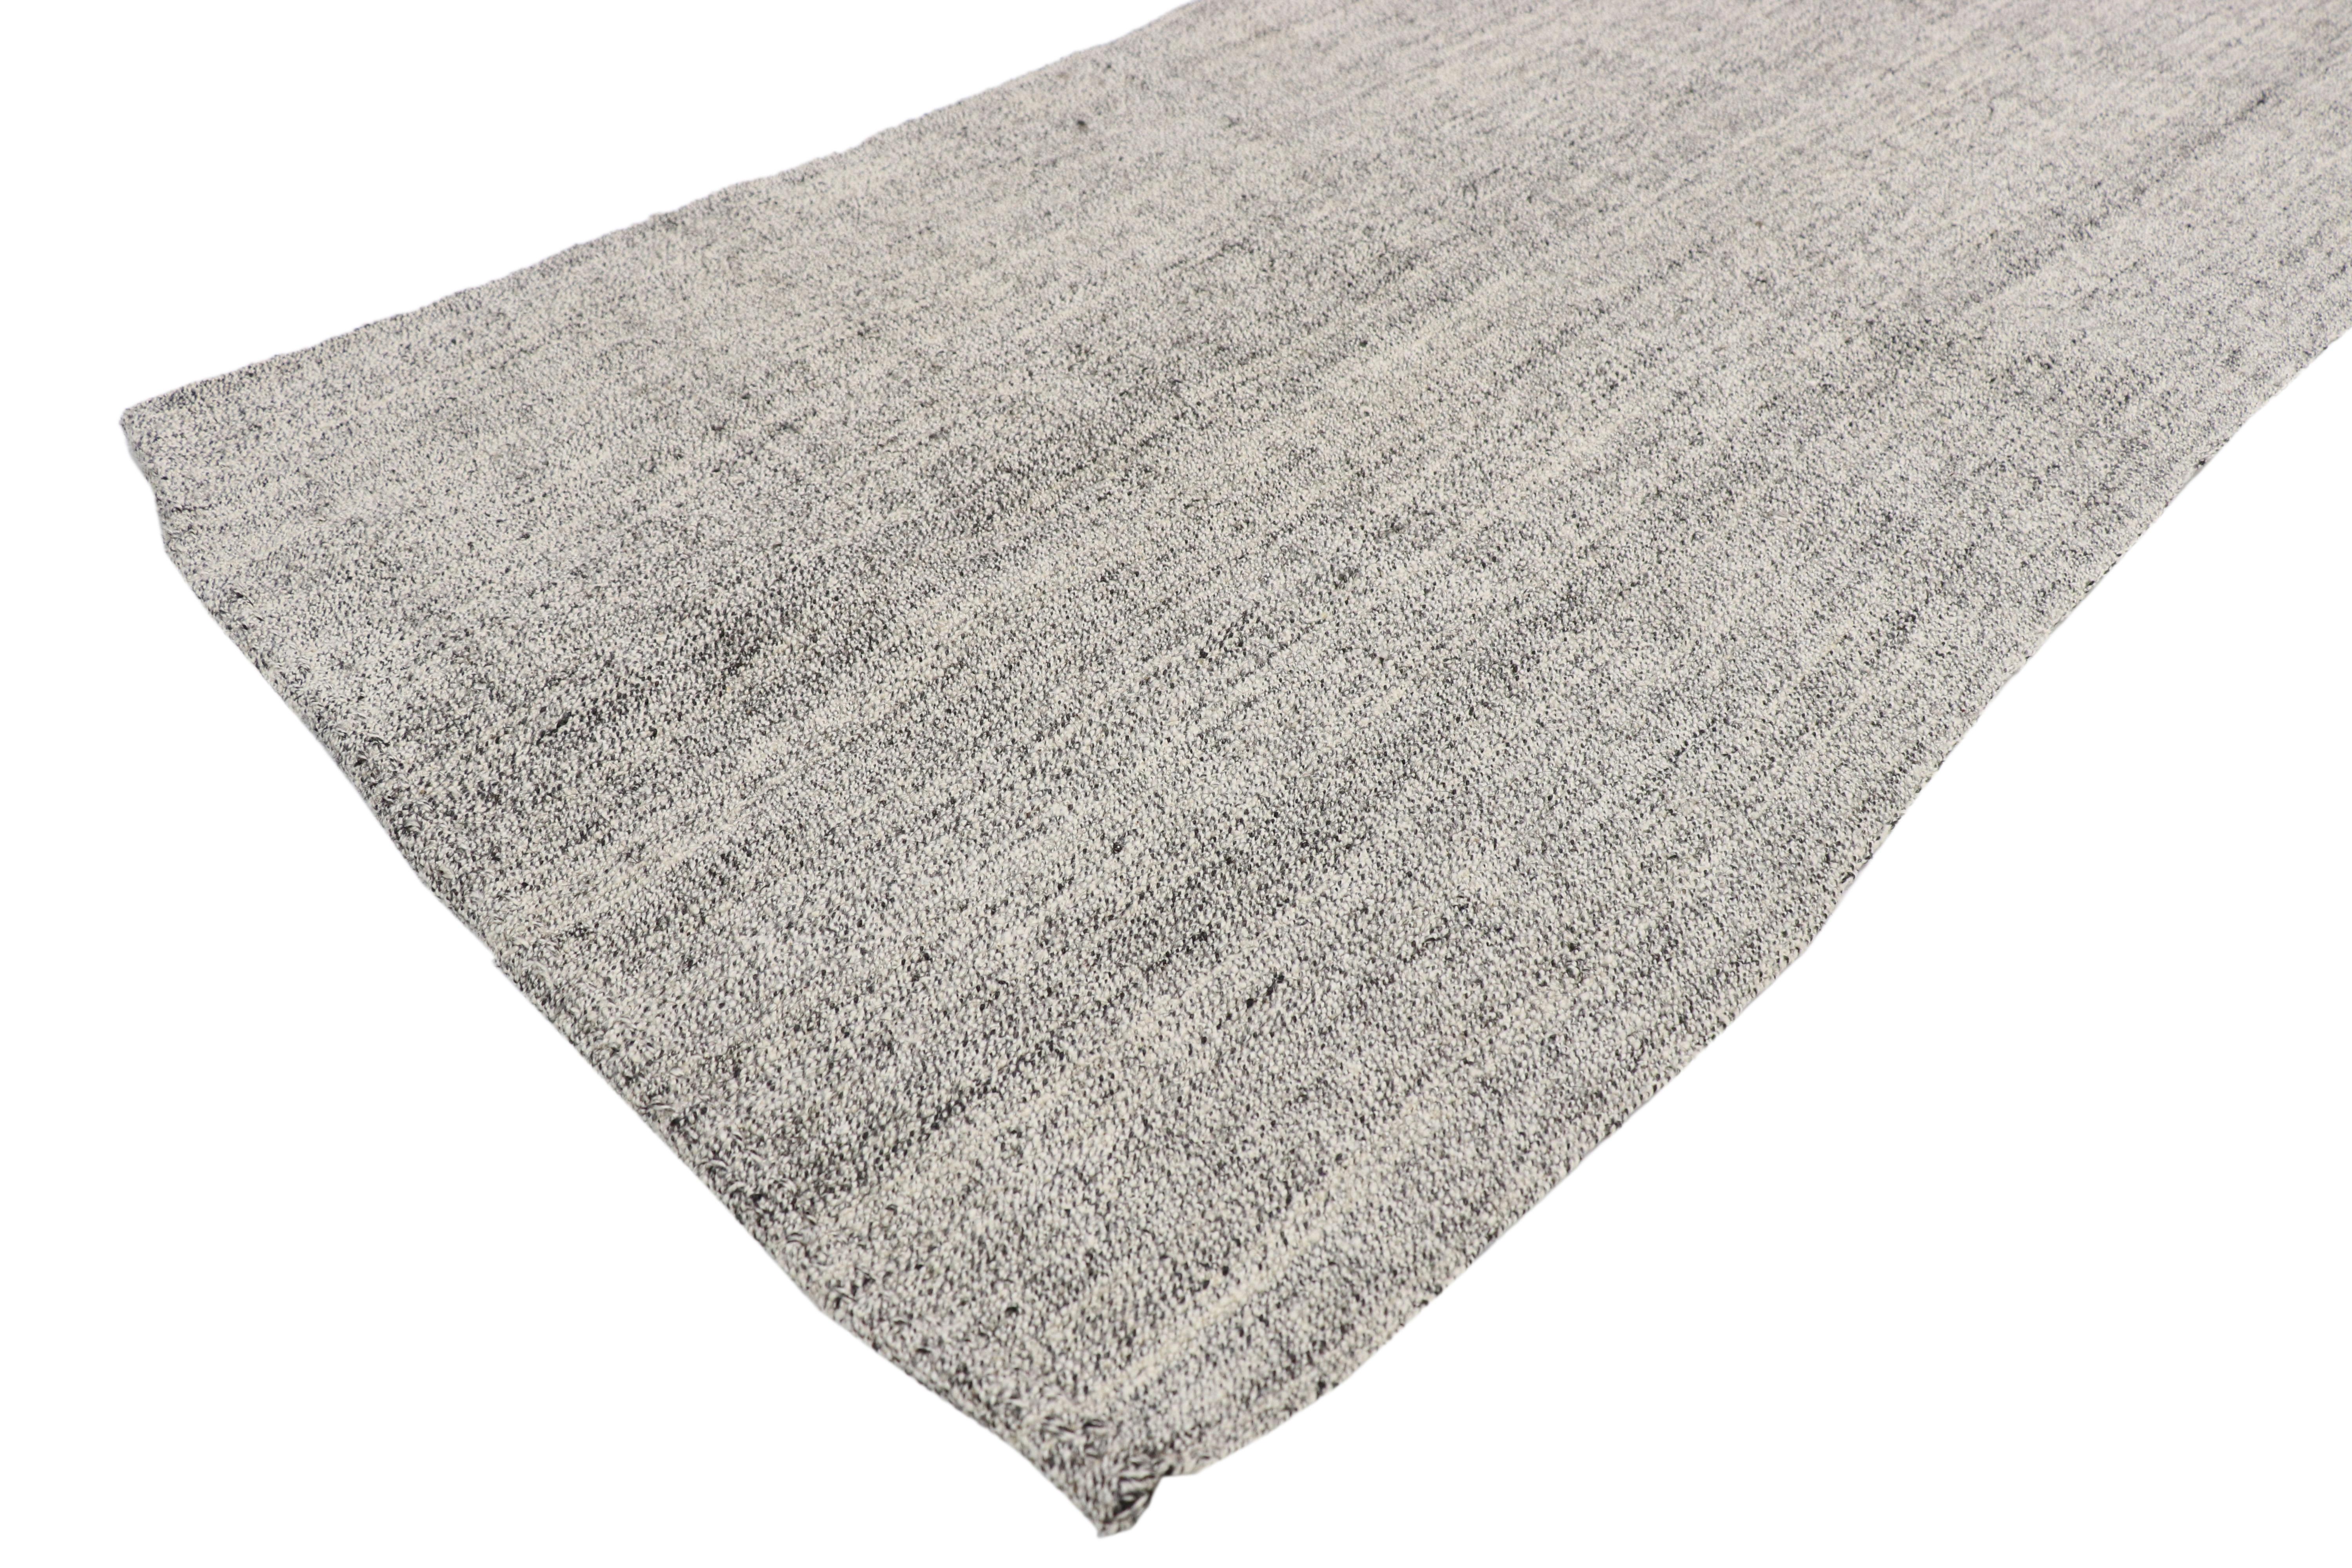 50894 vintage Turkish Kilim extra-long hallway runner with Industrial style. This vintage Turkish Kilim runner is a beautiful marriage of modern Industrial and fresh, contemporary form. Natural wool with goat hair and hemp striations shapes the